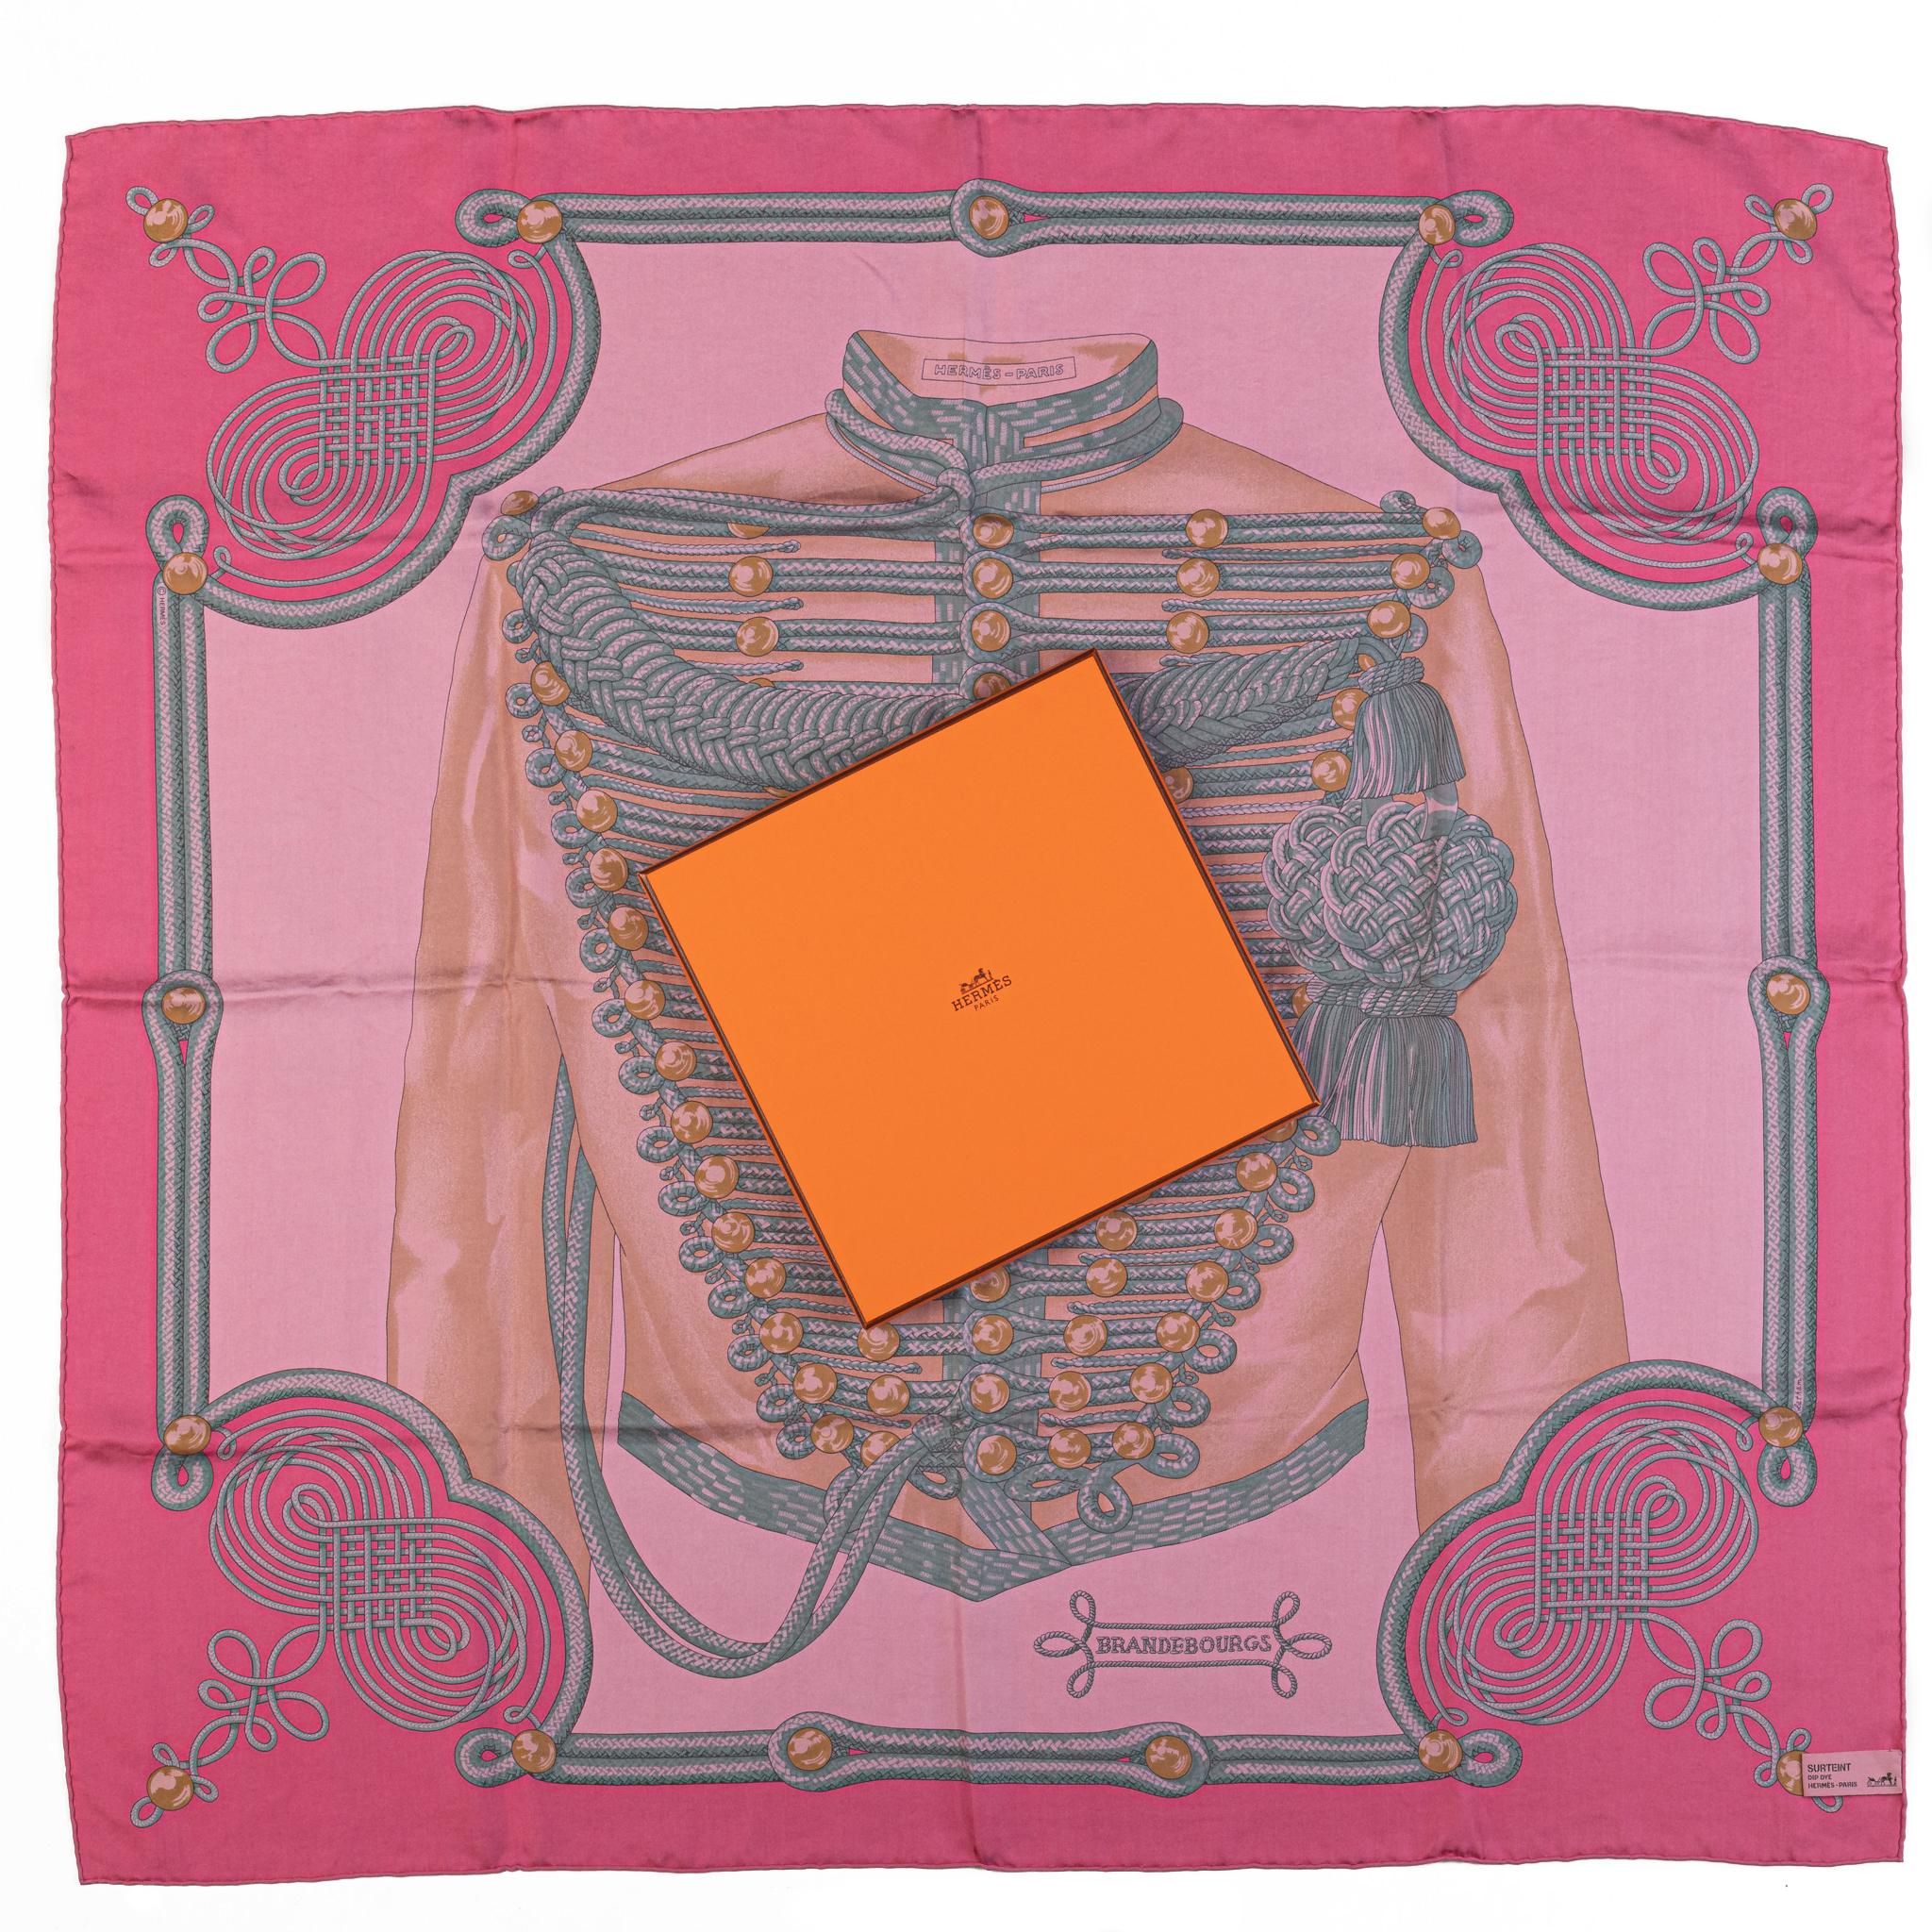 Hermès new pink collectible Brandebourg in washed silk. Comes with original box .